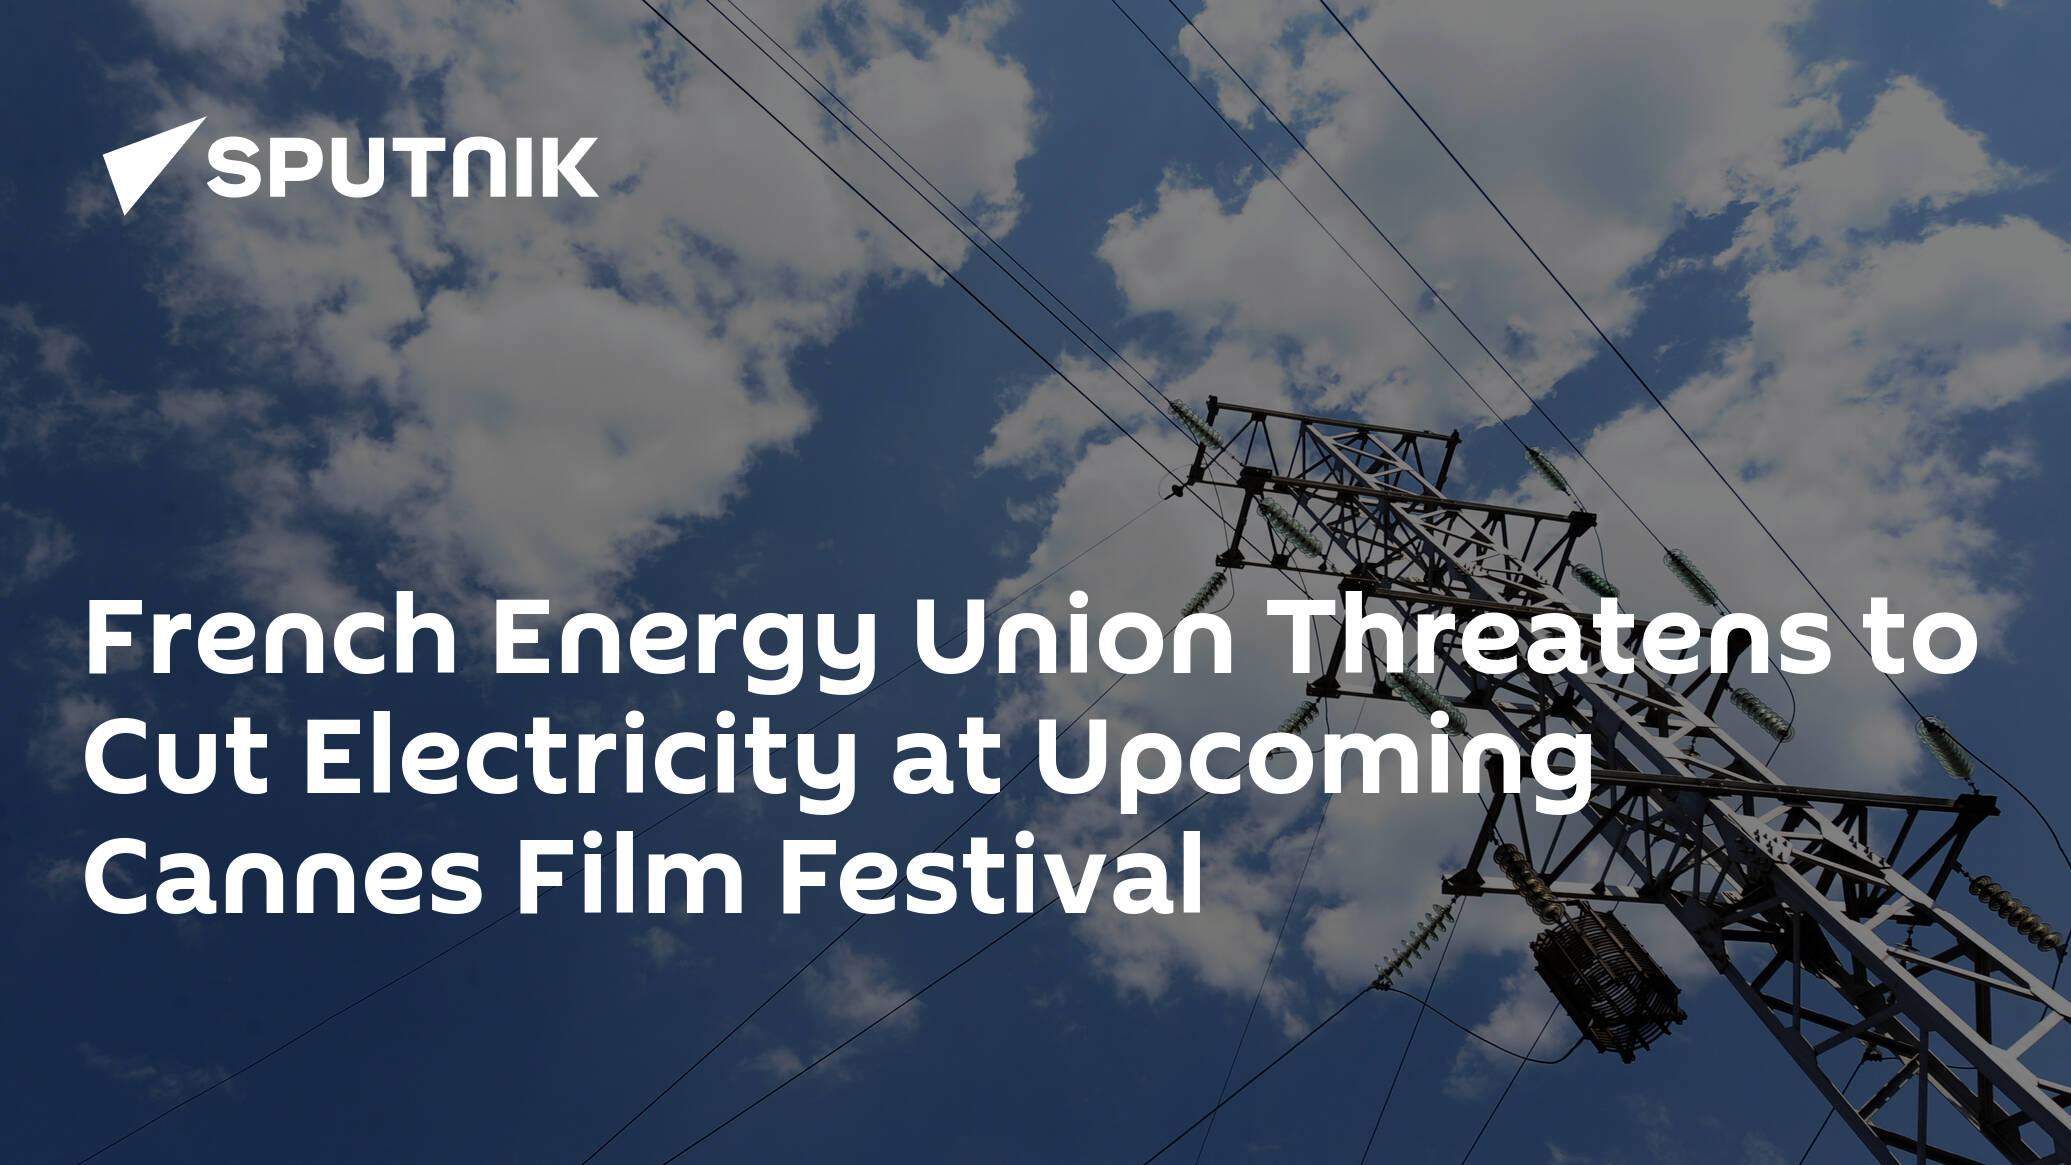 French Energy Union Threatens to Cut Electricity at Upcoming Cannes Film Festival